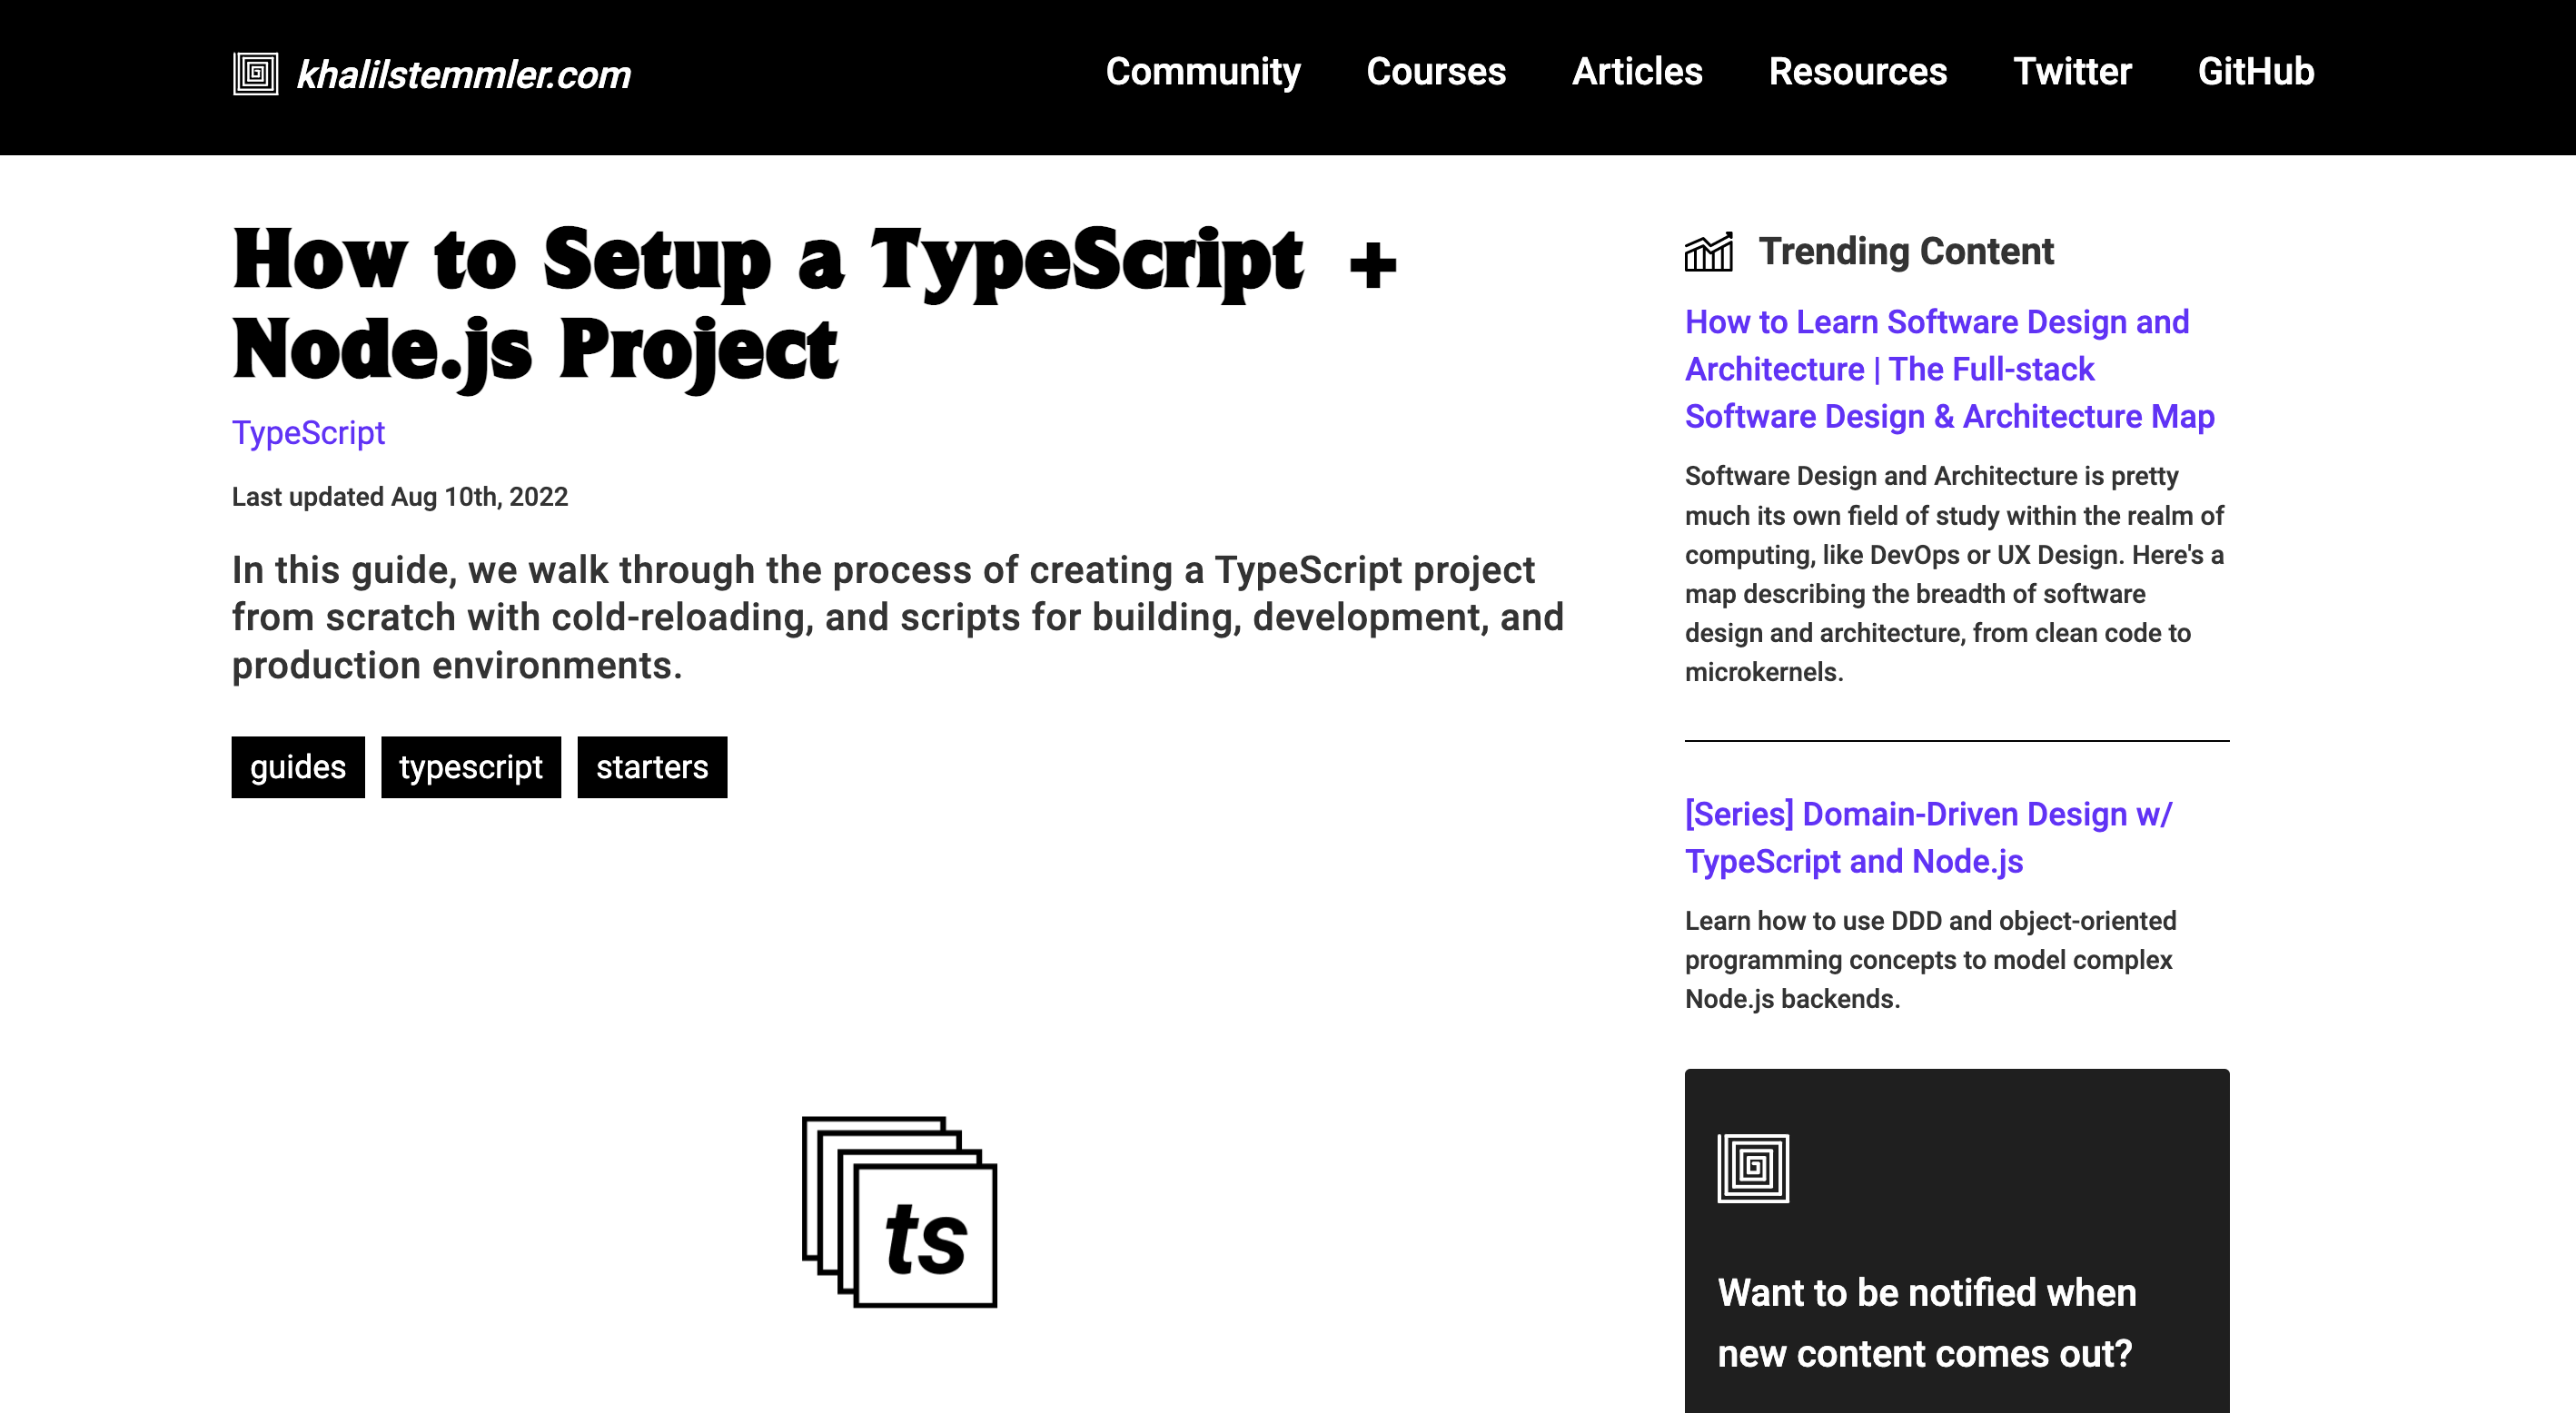 Template for setting up TypeScript & Node.js project